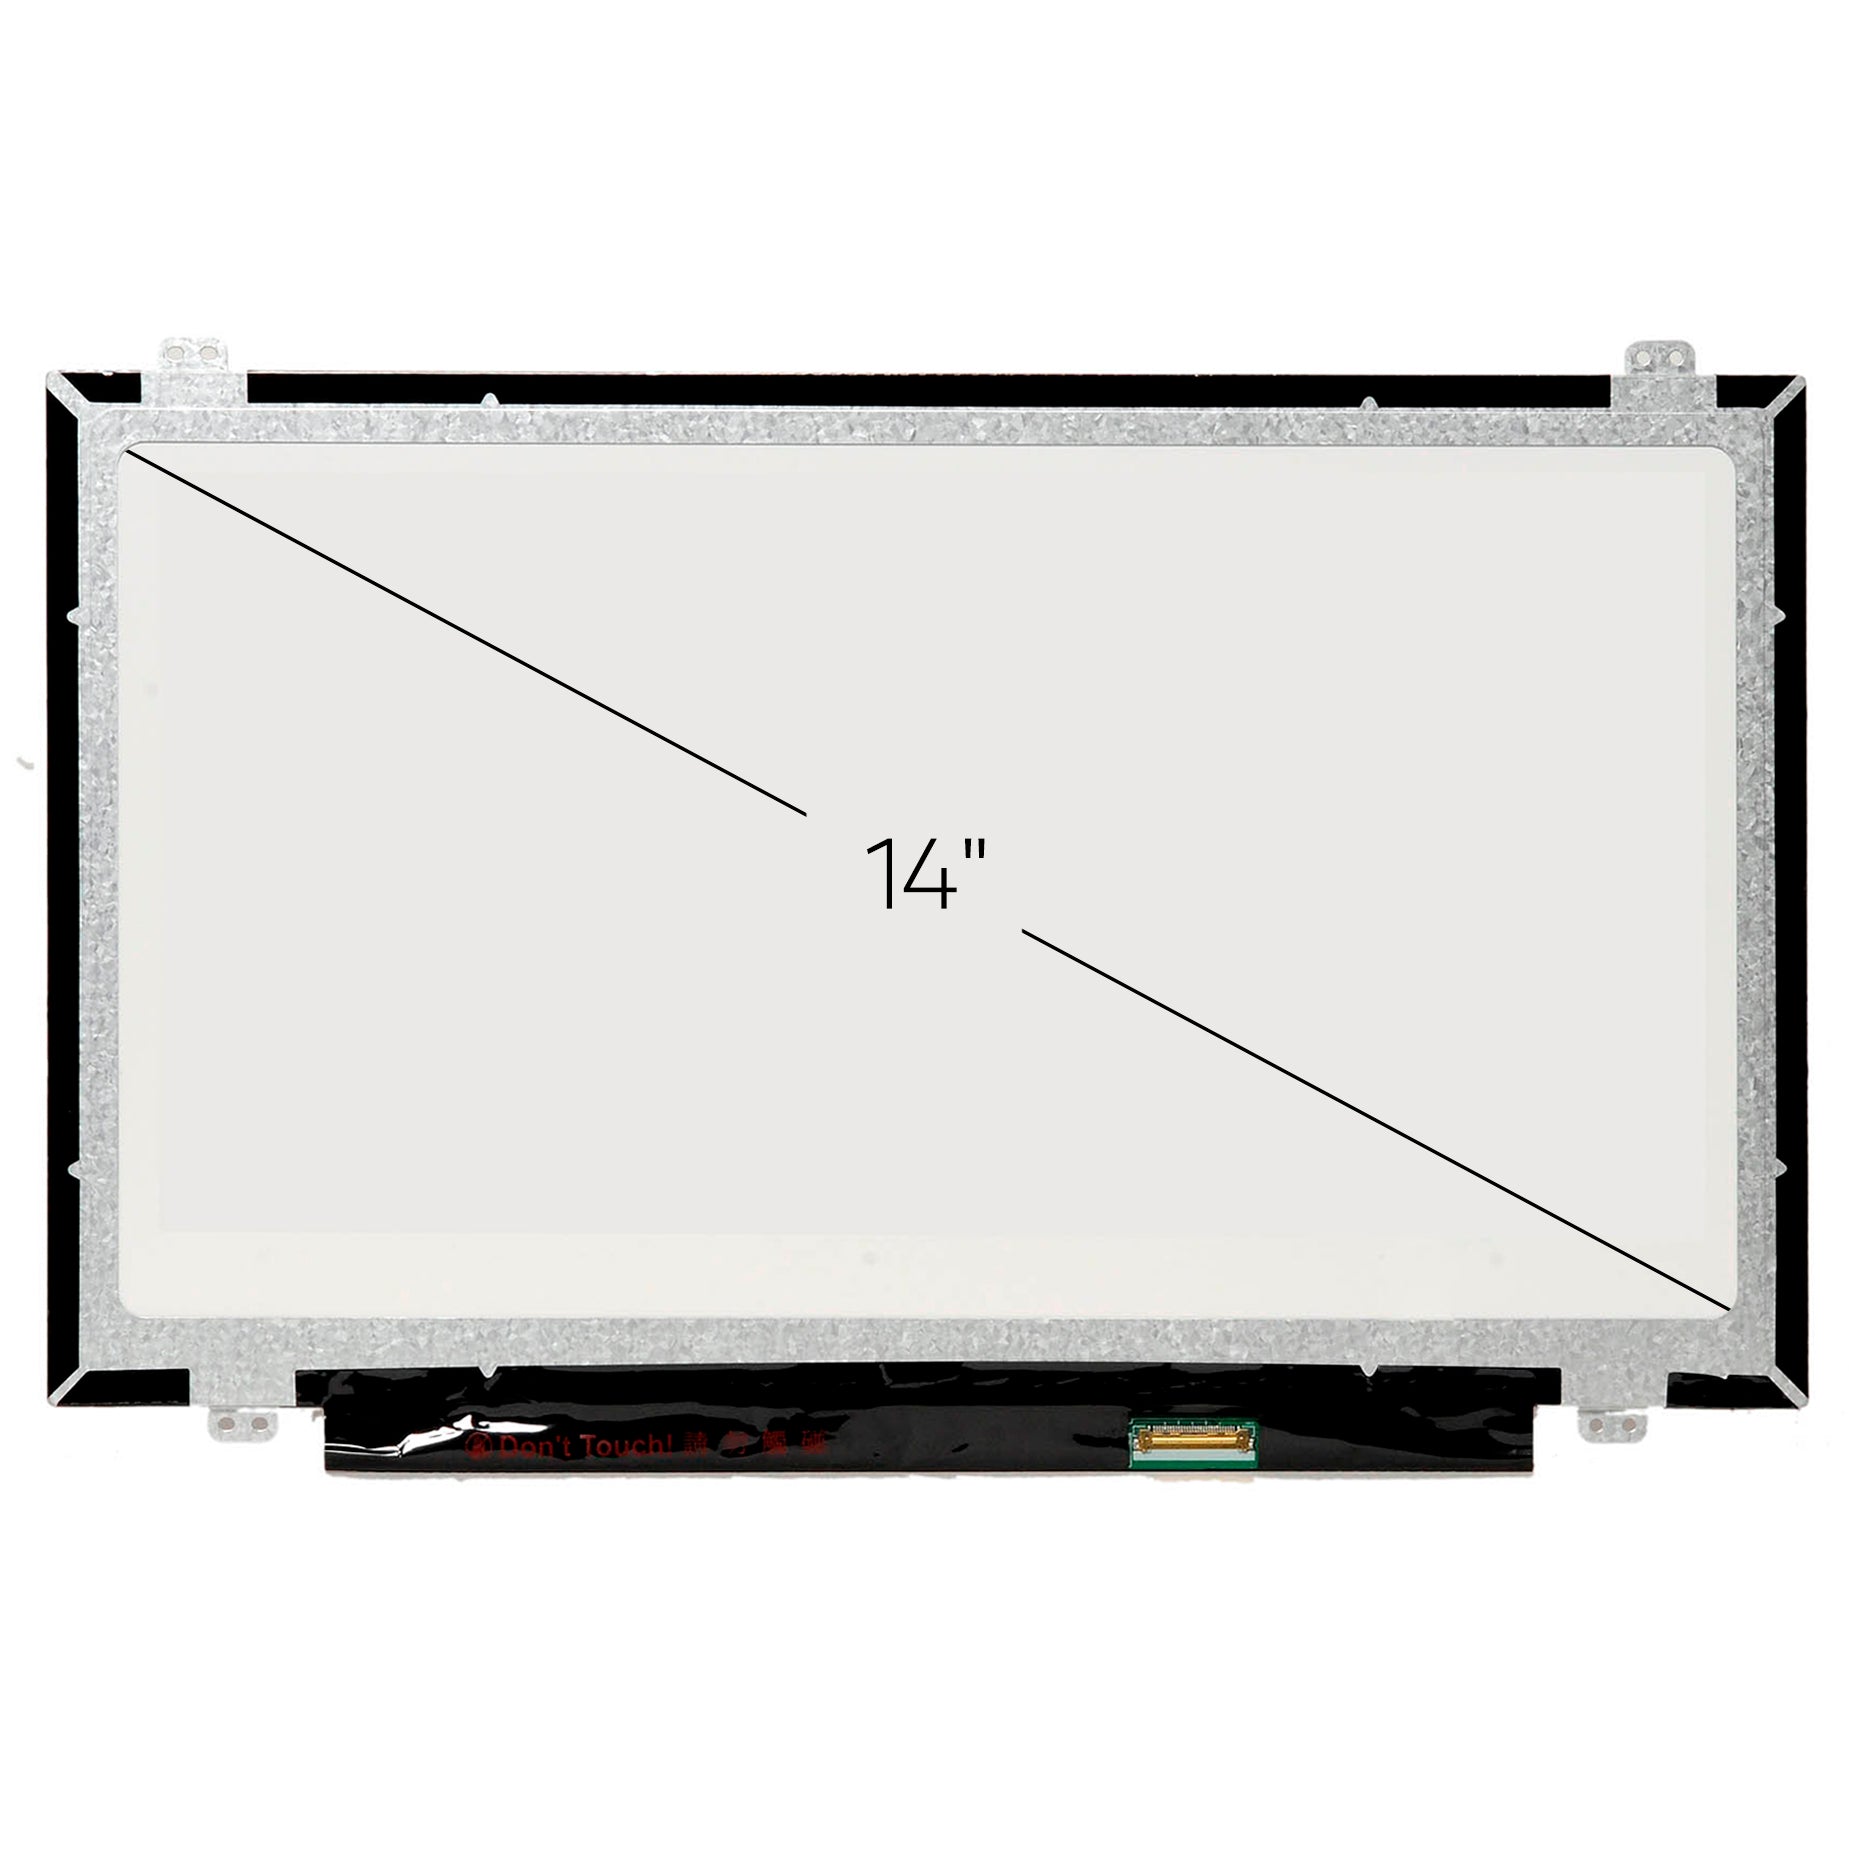 Screen Replacement for Lenovo FRU 04X5880 HD 1366x768 Glossy LCD LED Display